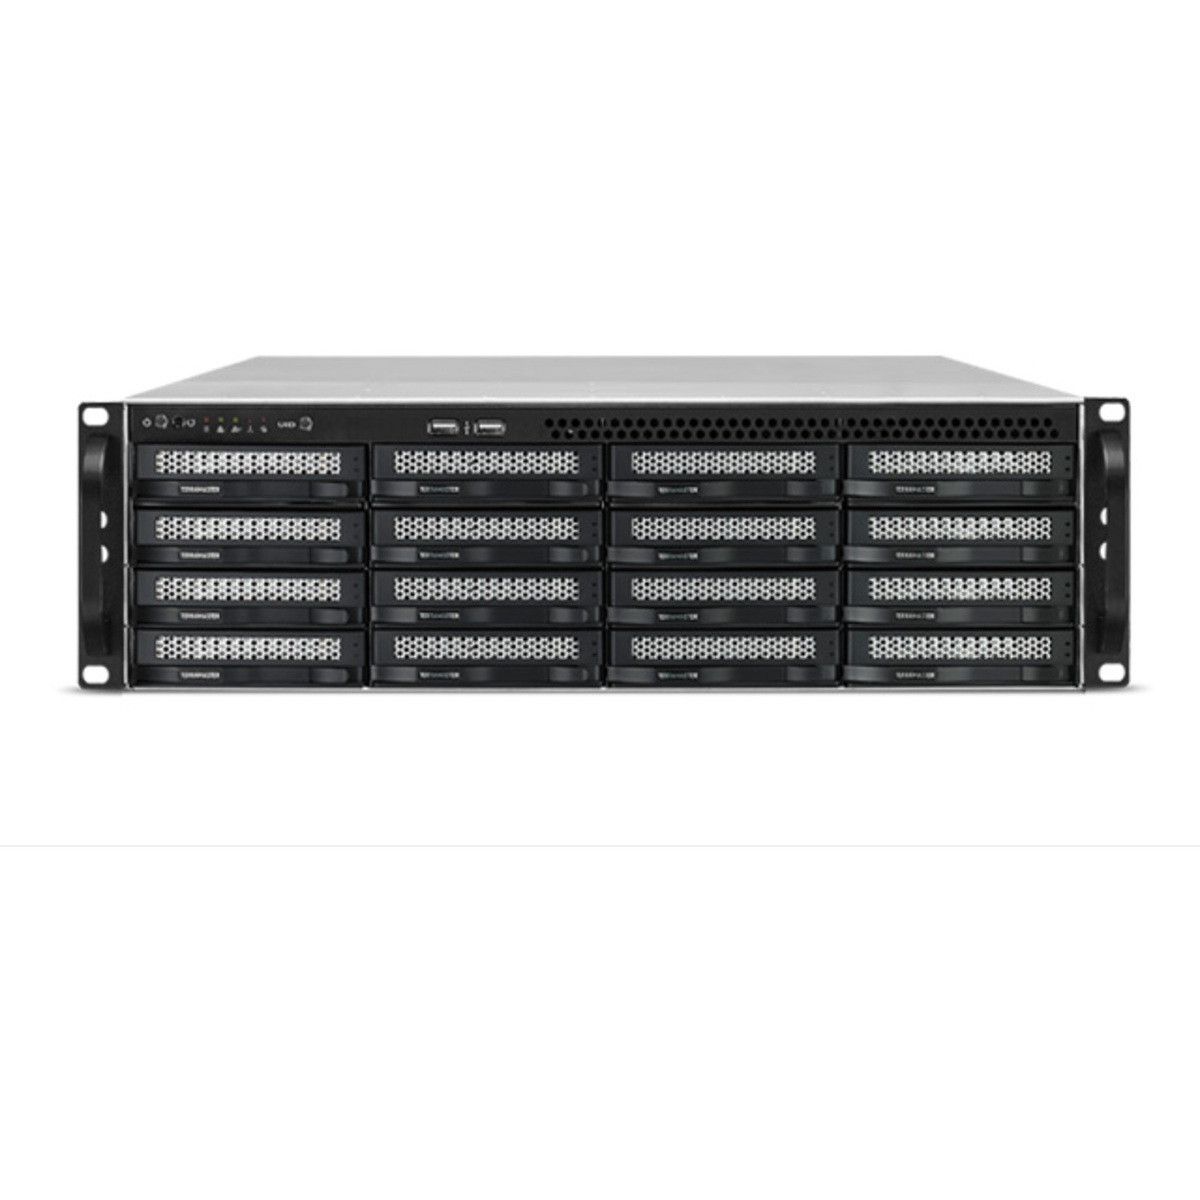 TerraMaster U16-722-2224 64tb 16-Bay RackMount Large Business / Enterprise NAS - Network Attached Storage Device 16x4tb Western Digital Red Pro WD4003FFBX 3.5 7200rpm SATA 6Gb/s HDD NAS Class Drives Installed - Burn-In Tested U16-722-2224